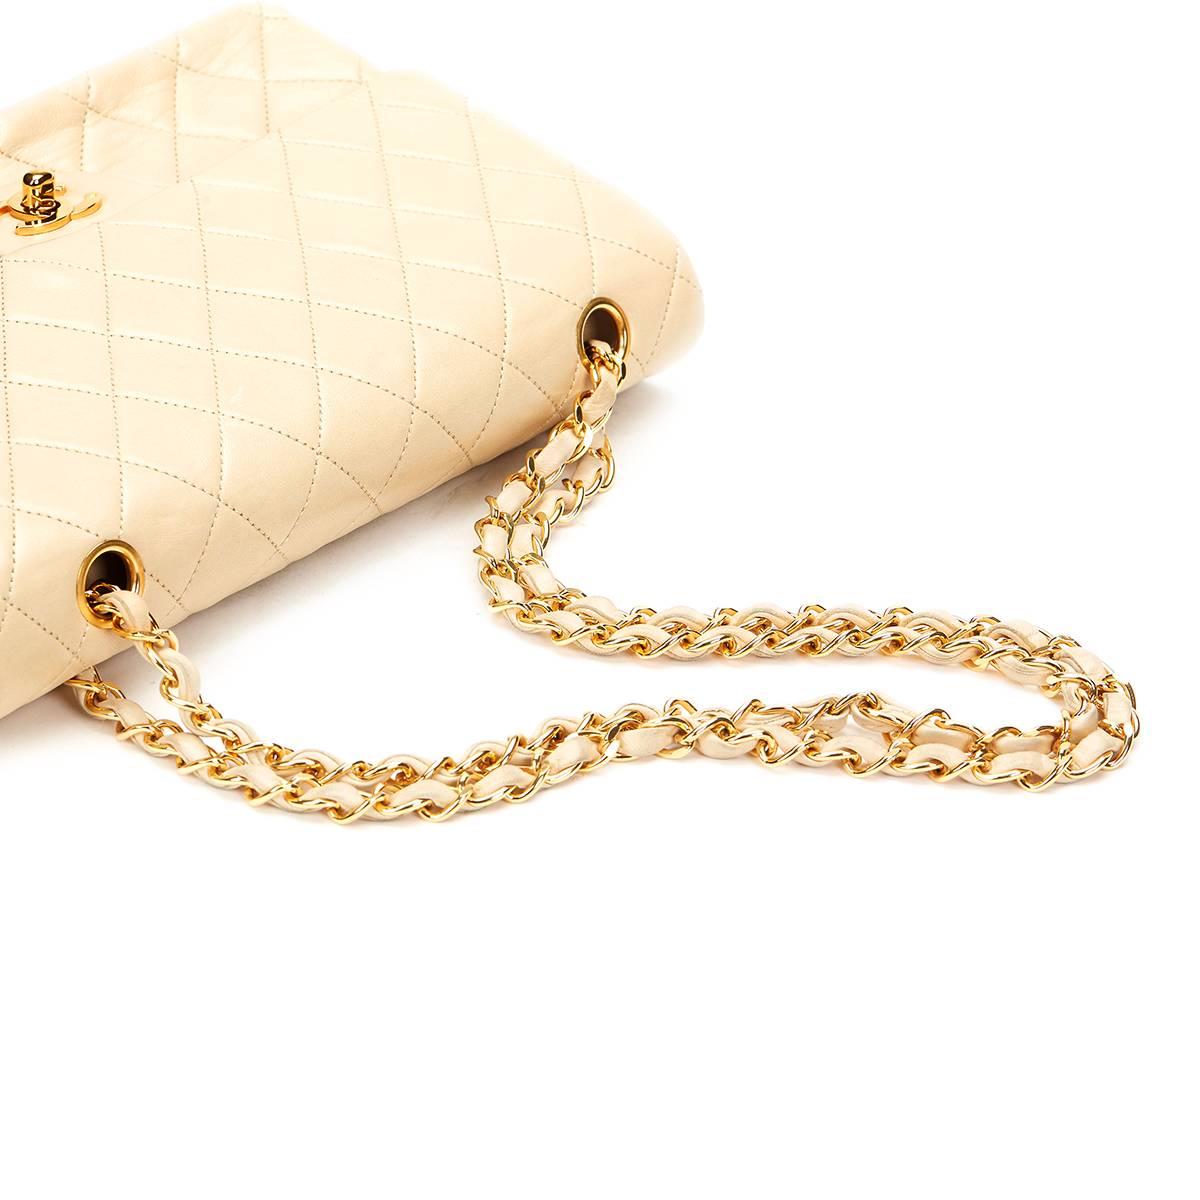 Beige 1991 Chanel Ivory Quilted Lambskin Vintage Medium Classic Double Flap Bag